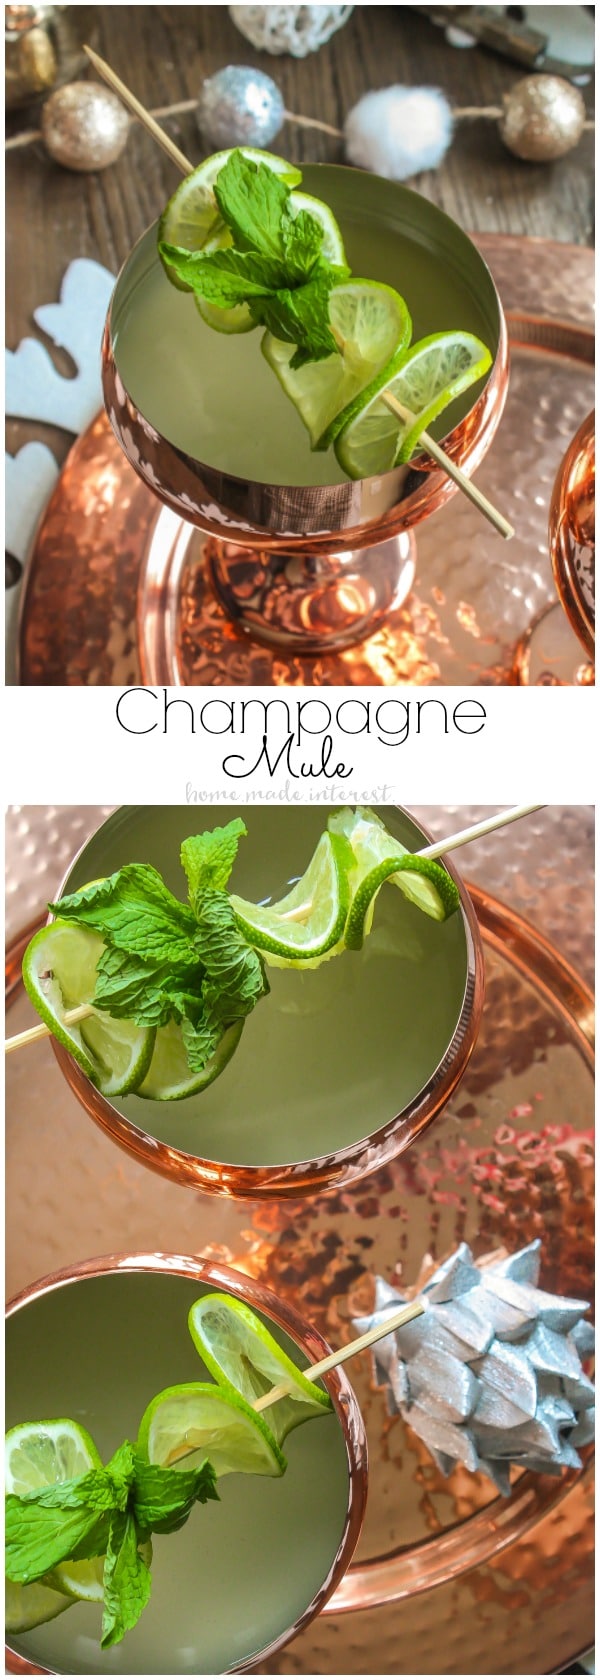 The Moscow Mule has become very trendy. This New Year's party make a toast with a Champagne Moscow Mule. Pop the bubbly when you count down and pour yourself a delicious Moscow Mule with a twist. This Champagne Moscow Mule recipe is the perfect fizzy drink to serve at your Christmas or New Year’s Party. 